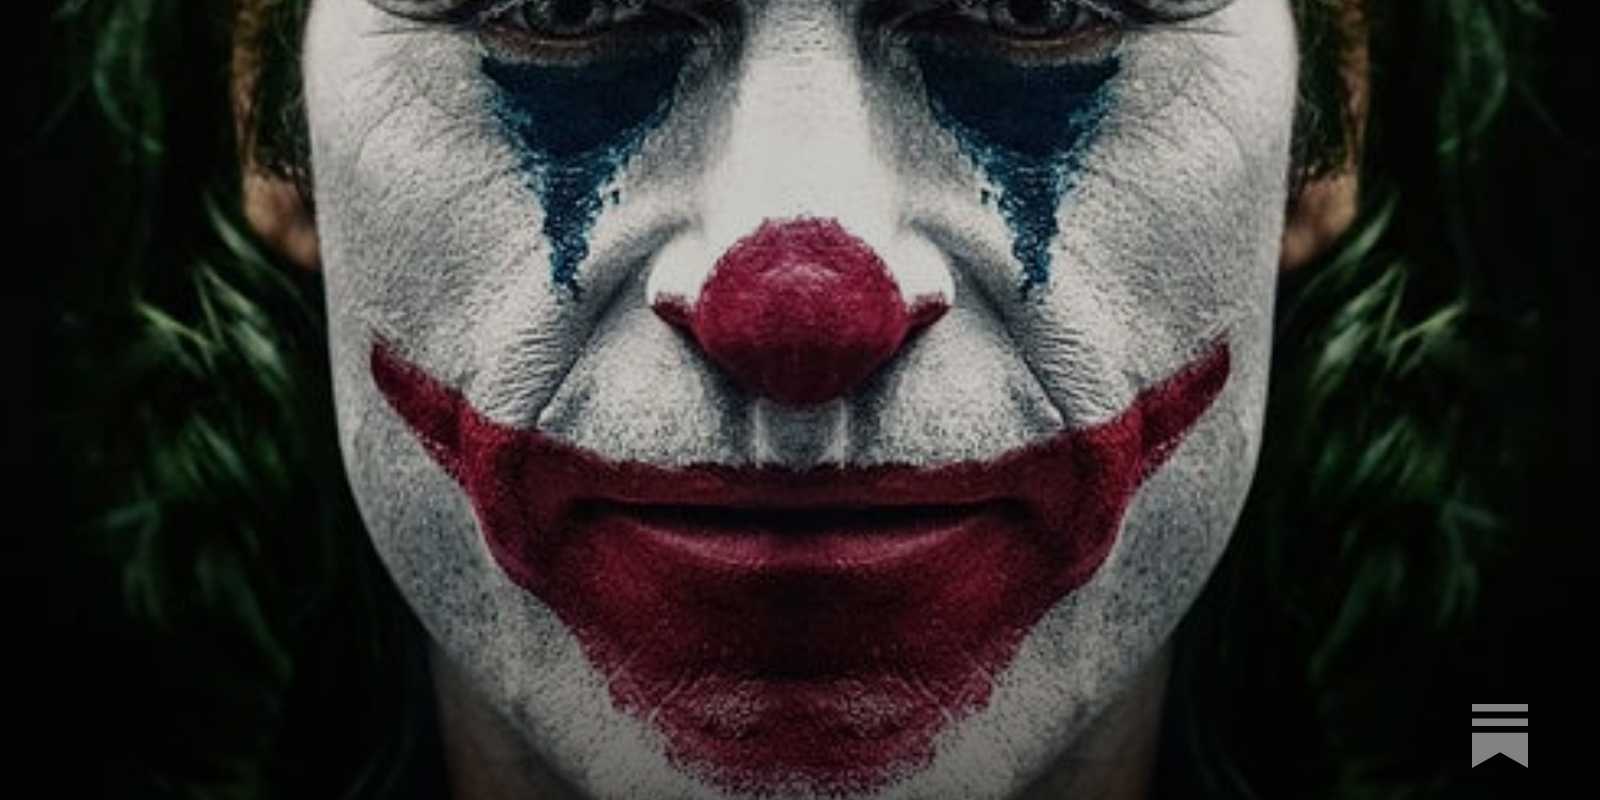 Why Is Hollywood Developing Three Different Joker Movies? - The Atlantic